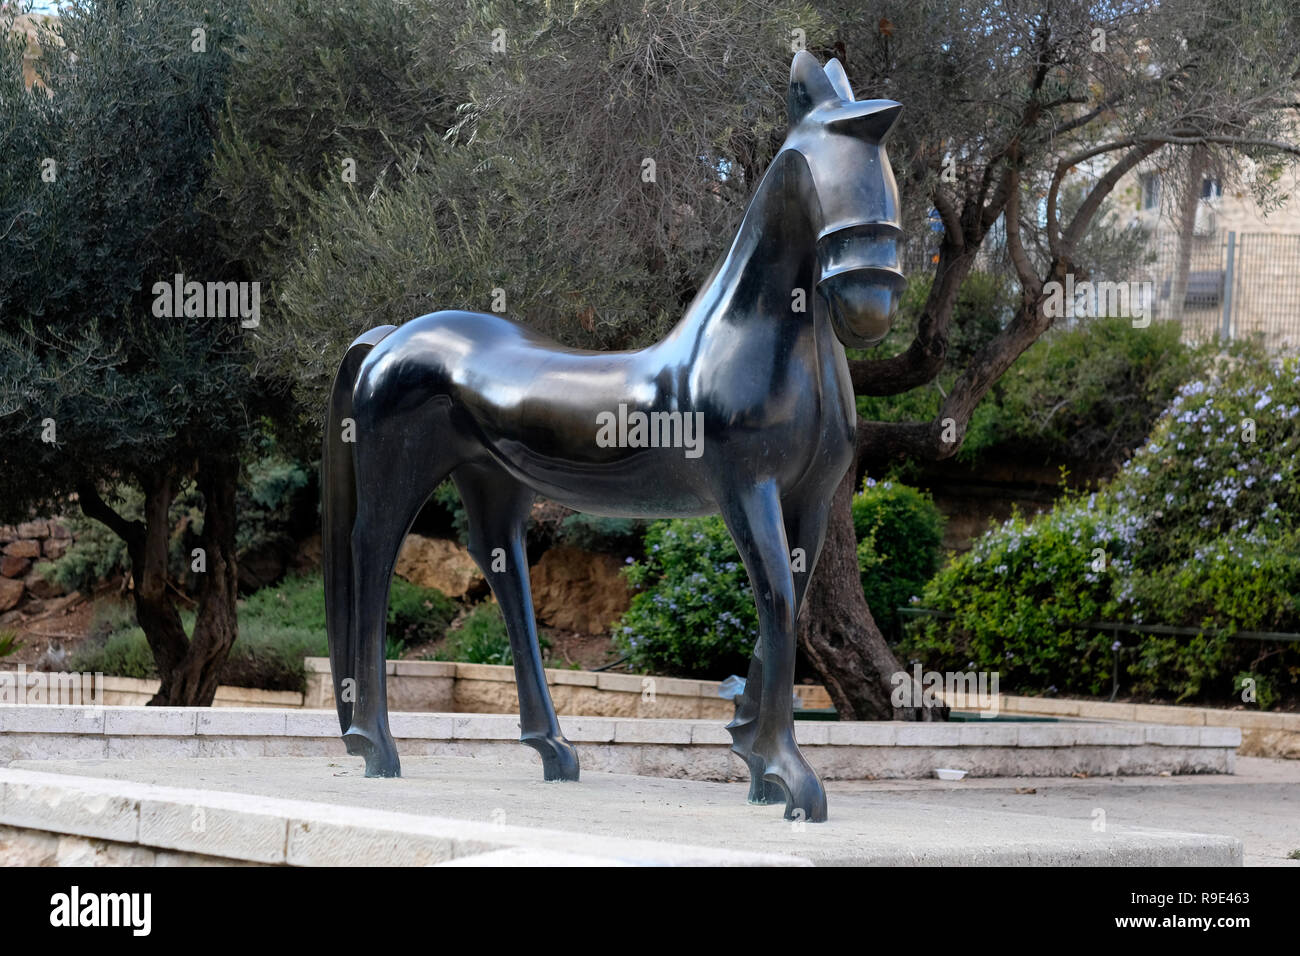 The 'Horse of Peace' one of several Veneti Horses world wide, sculptured and donated by Yugoslavian artist Oskar Kogoj located in the Frances Hiatt Garden in Jerusalem, Israel. This sculpture can be found in several locations around the world. It is a stylised depiction of the horse from the Early Iron Age. Stock Photo